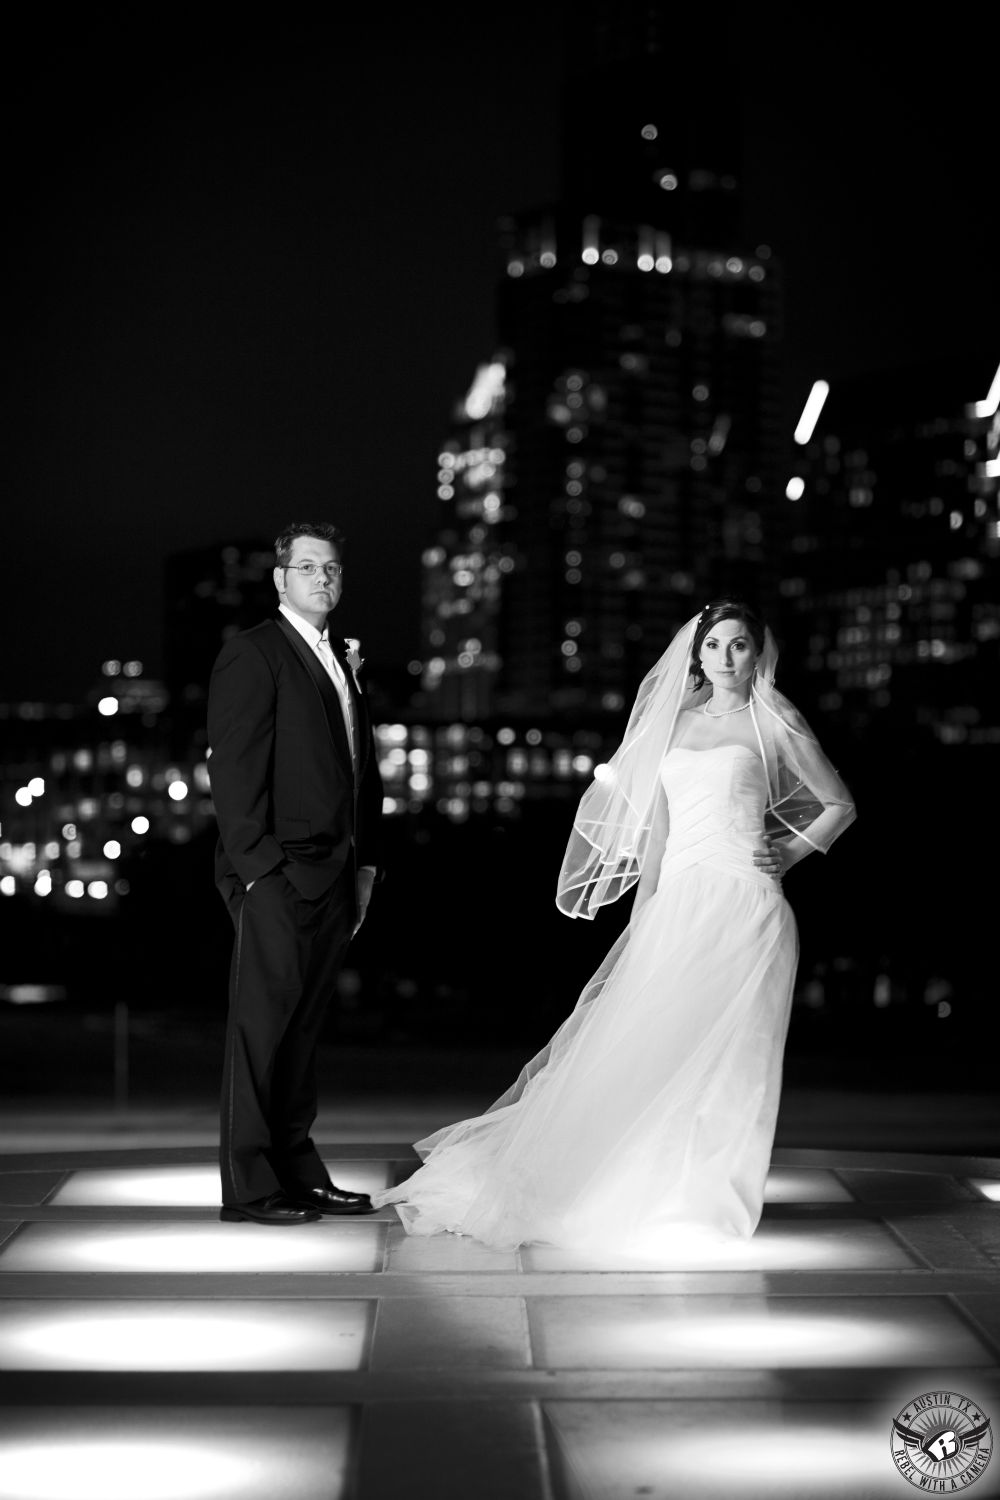 Dramatic portrait of bride and groom on their wedding day at the Long Center standing in front of the Austin city skyline at night taken by Austin wedding photographer, Rebel with a Camera.